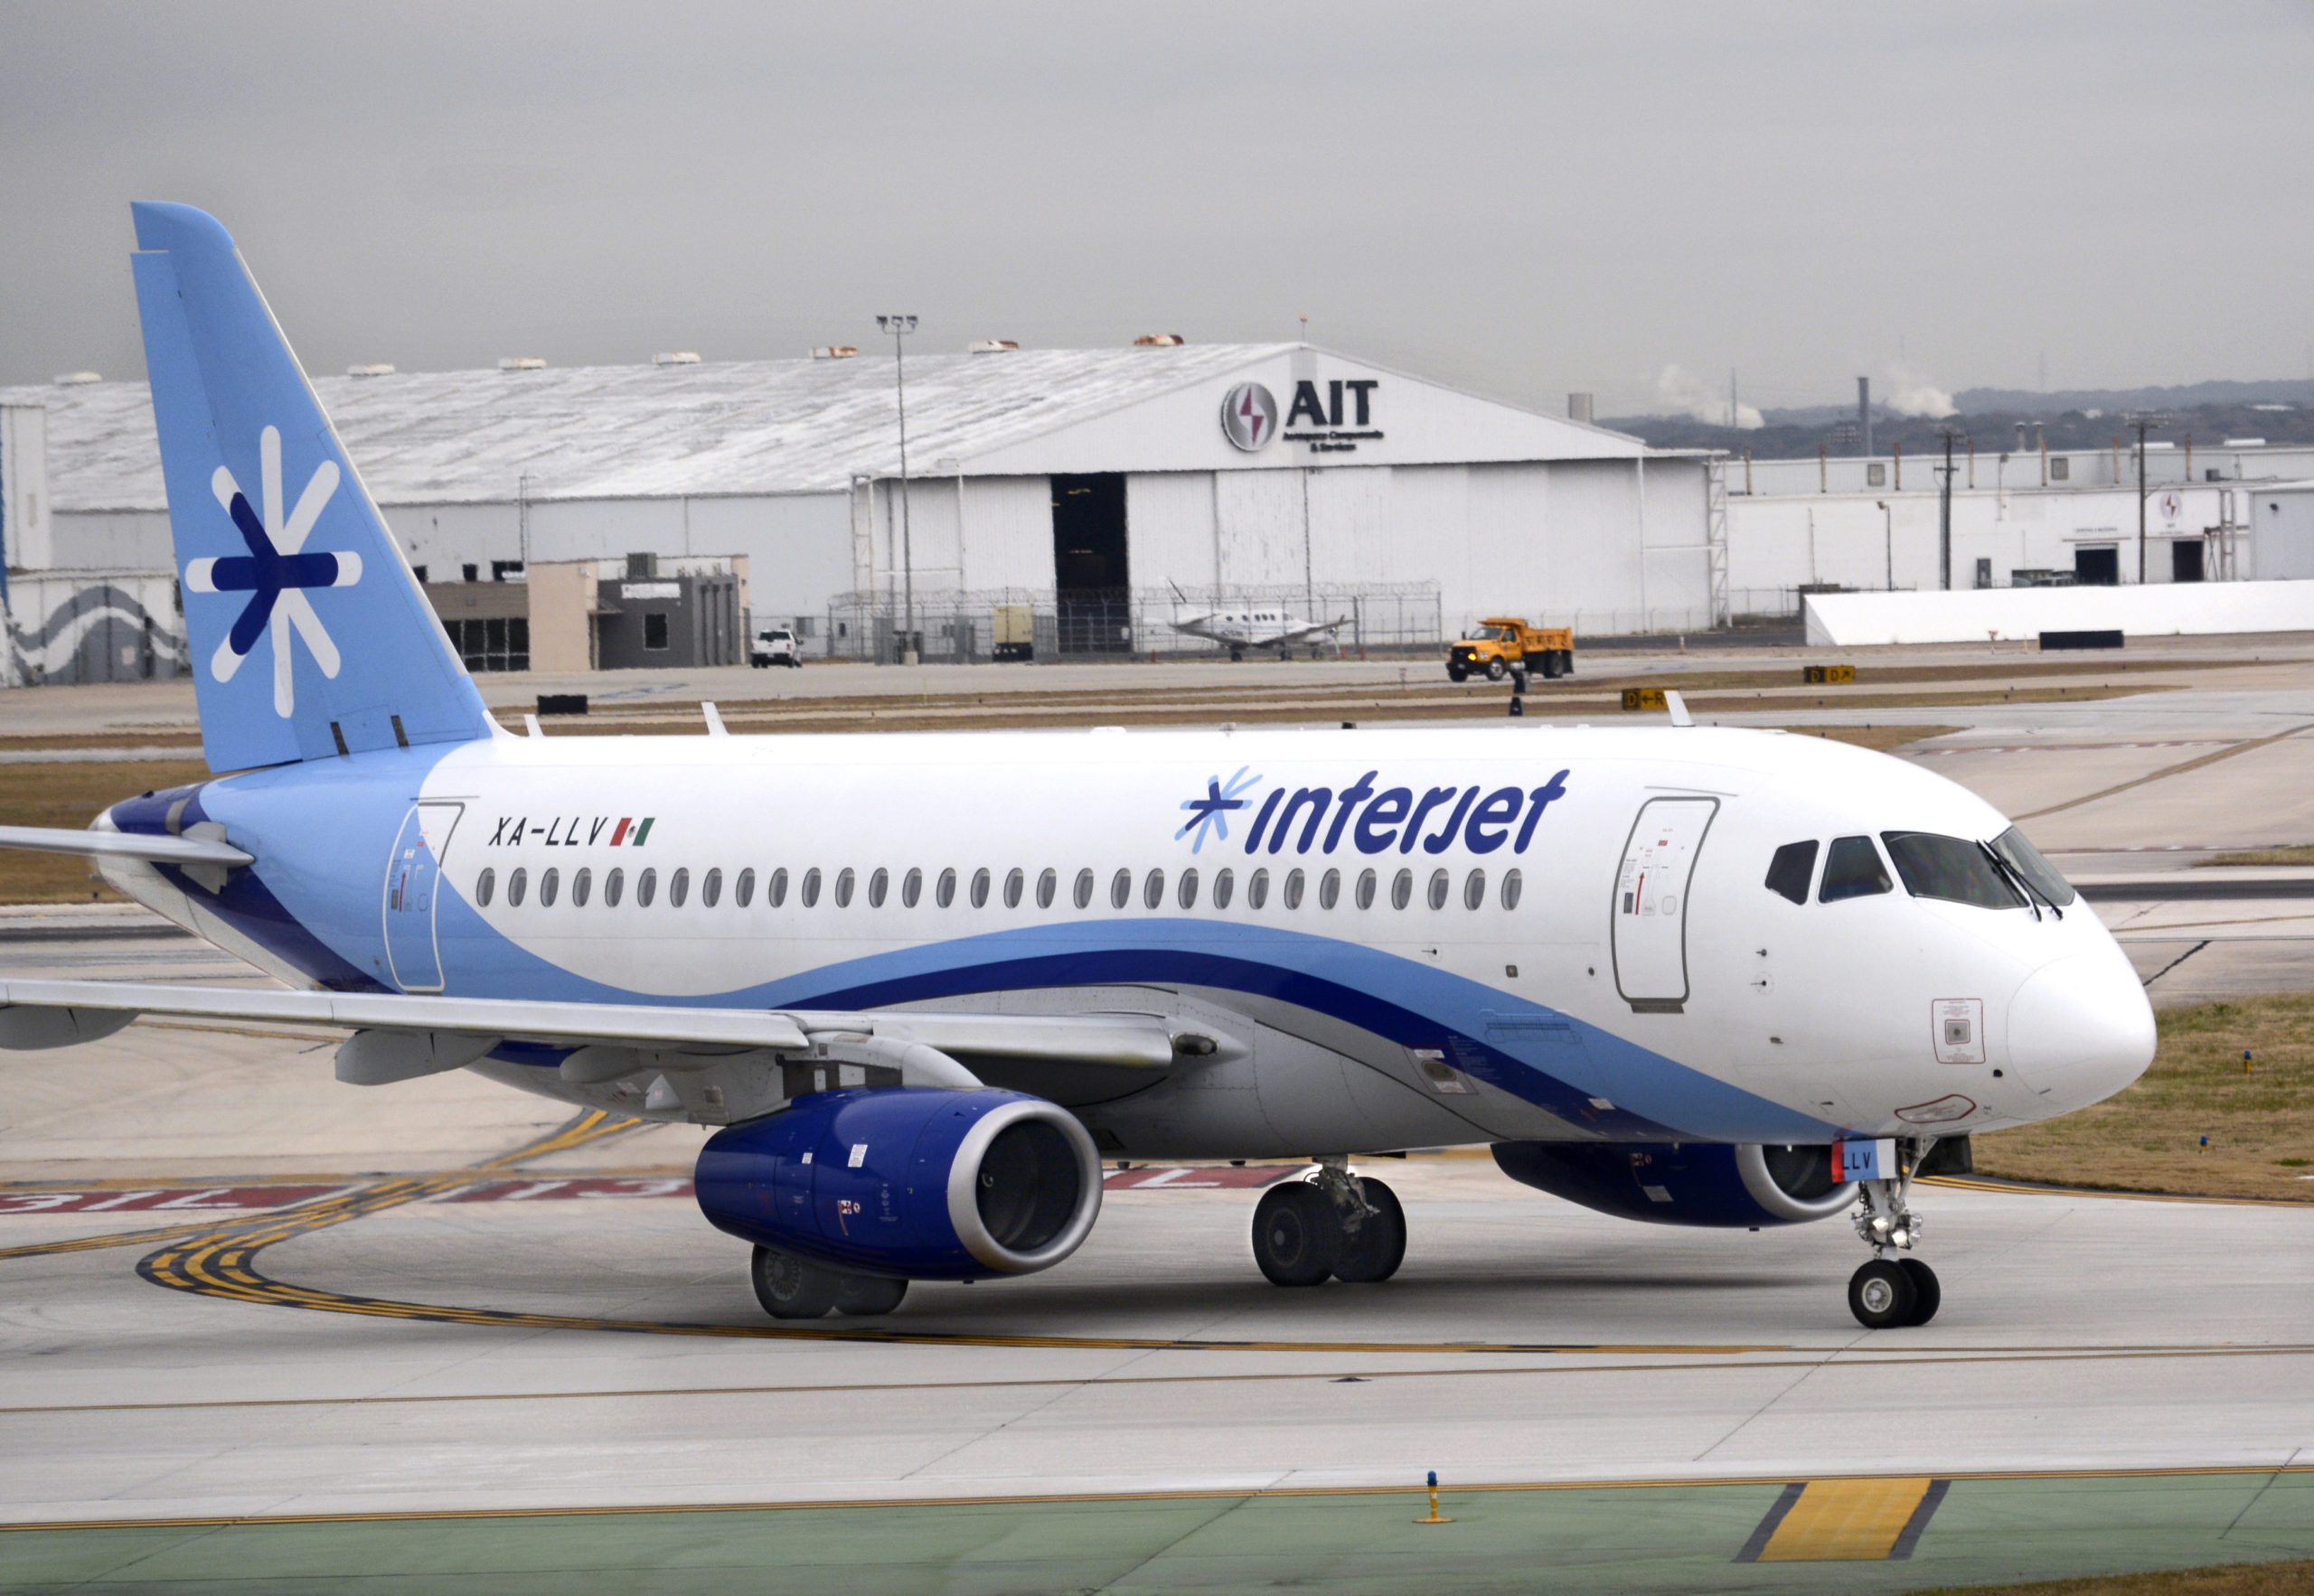 SAN ANTONIO, TEXAS - DECEMBER 12, 2018: An Interjet Airlines Sukhoi Superjet passenger jet taxis after landing at San Antonio International Airport in Texas. Interjet is a Mexican airline headquartered in Mexico City. (Photo by Robert Alexander/Getty Images)